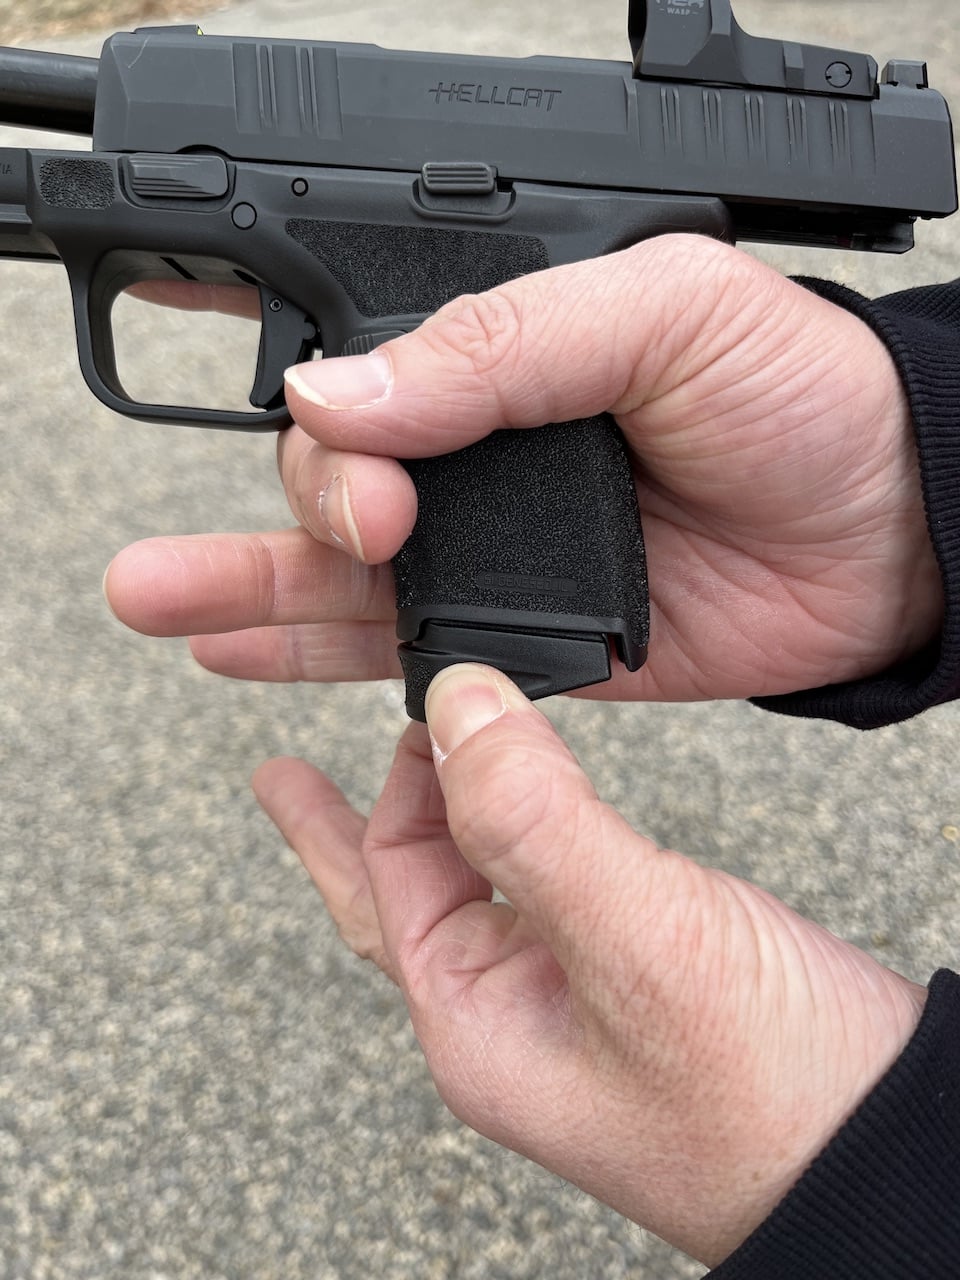 Tips for Managing Recoil for All Hand Sizes using pinky extender to improve grip